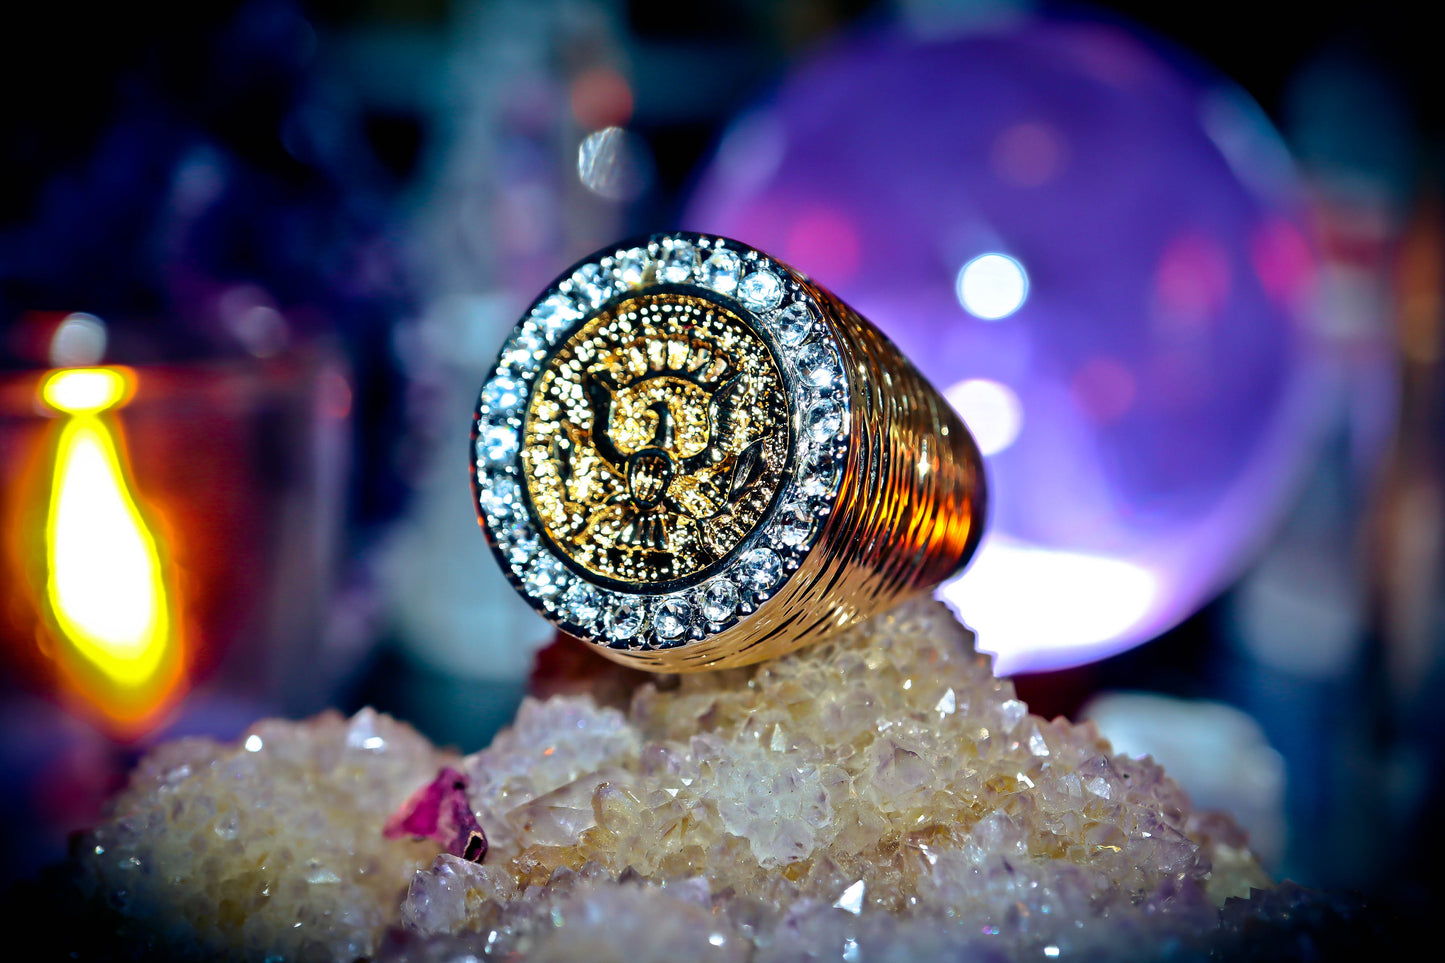 ALPHA WEALTH Luck/Winner OCCULT Spell Good Luck Haunted Ring $$ Be Successful at Everything in Life! Money, Business, Gambling, Lotto WIN Money Magnet $$$